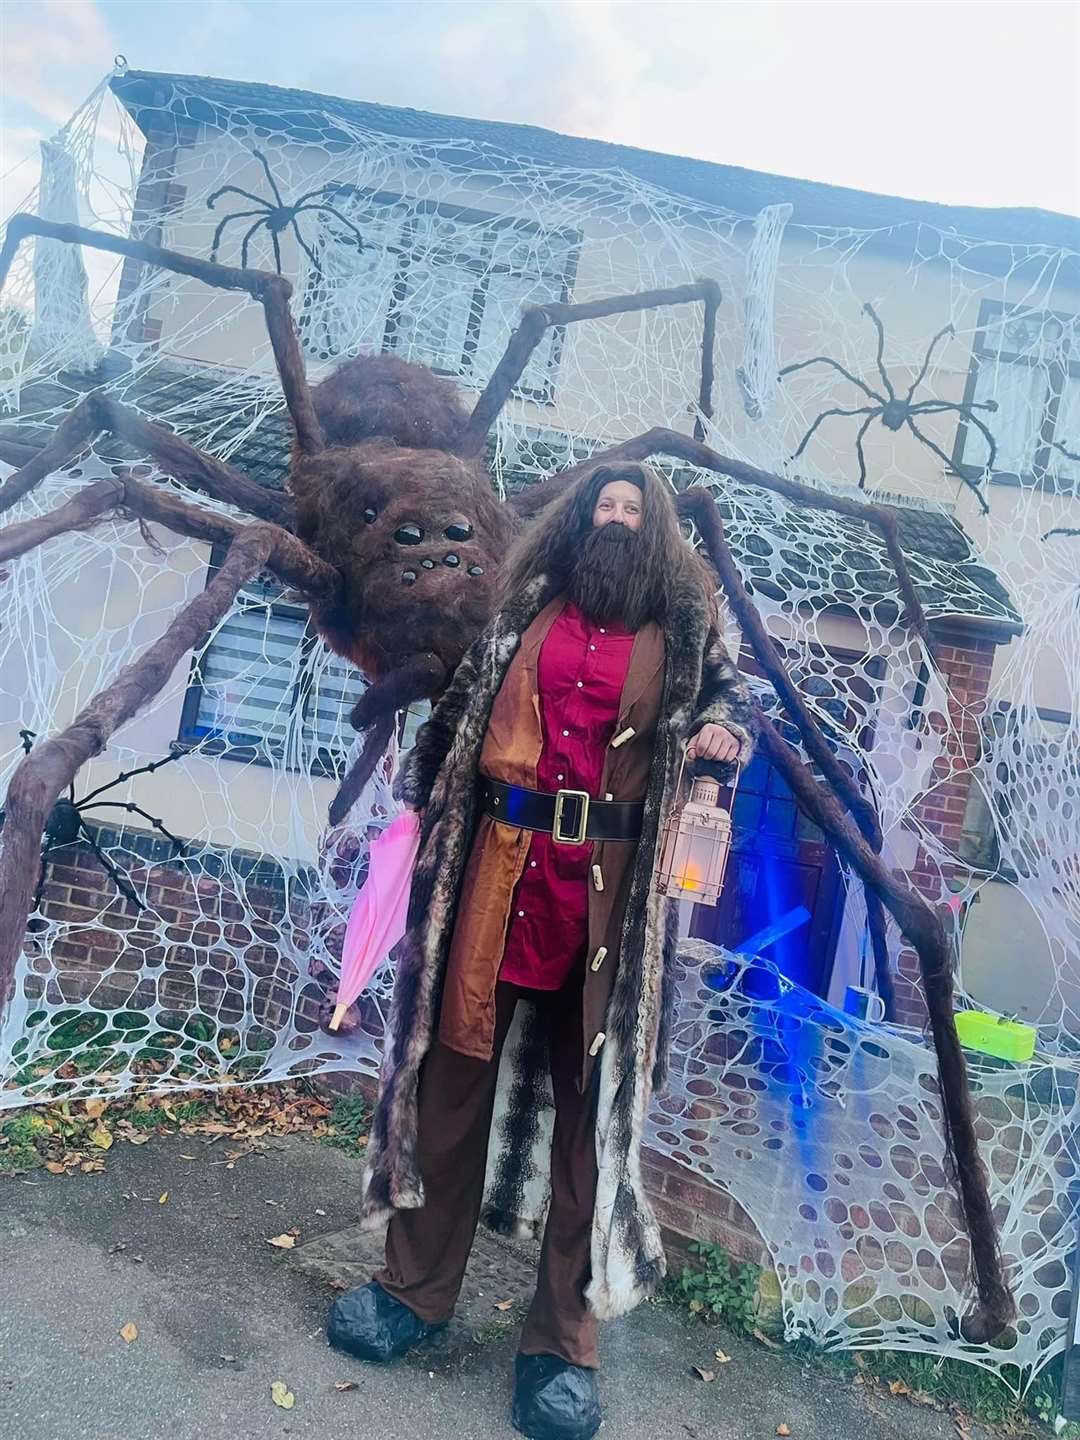 Kieron King outside the huge haunted Halloweeen house display in Lower Rainham Road, Gillingham which has raised more than £3,000 for charity. Picture: Kieron King